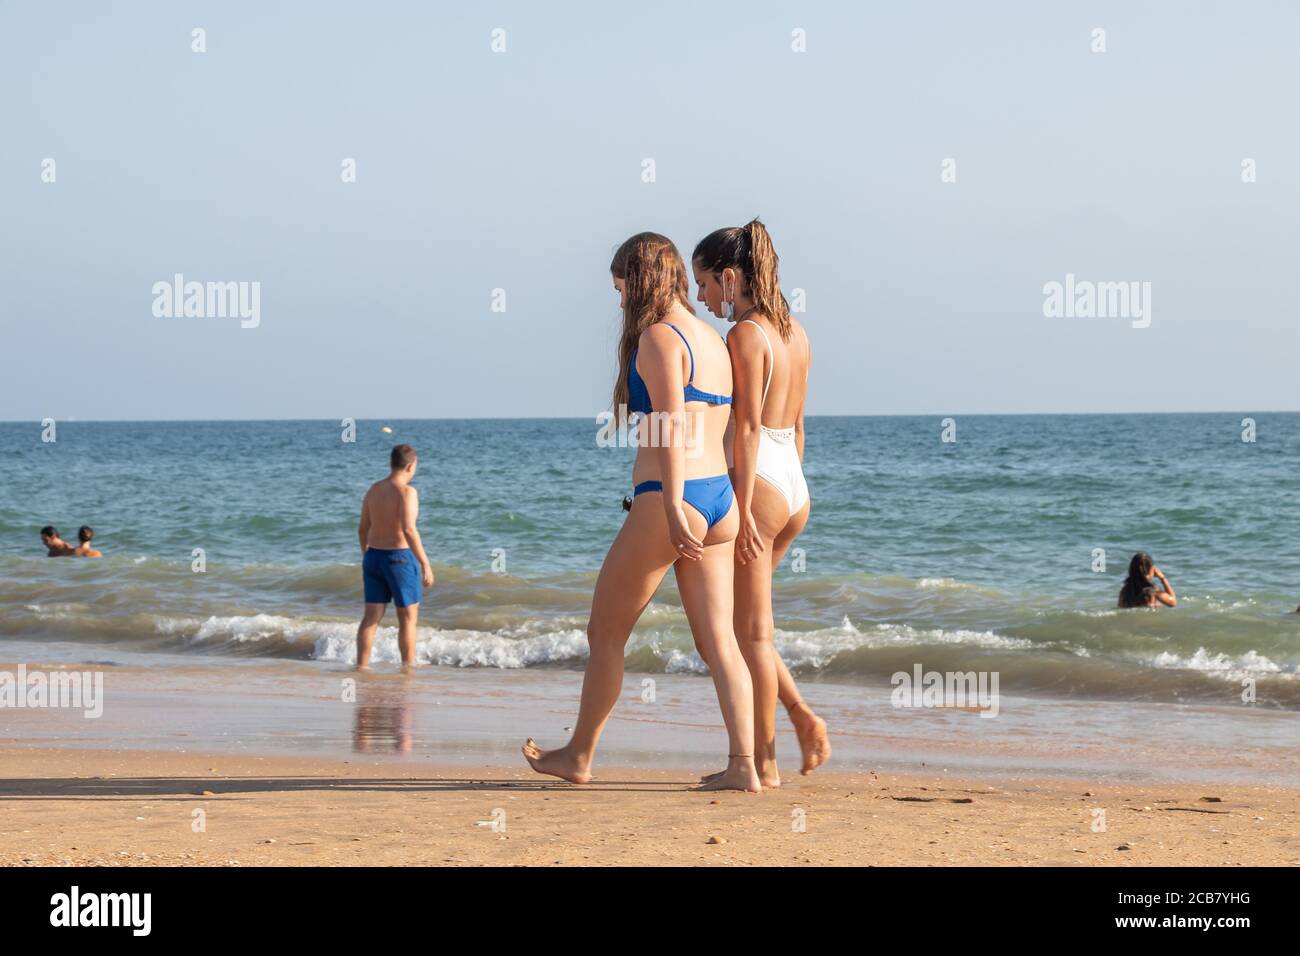 Punta Umbria, Huelva, Spain - August 7, 2020: Couple walking by the beach wearing protective or medical face masks. New normal in Spain with social di Stock Photo